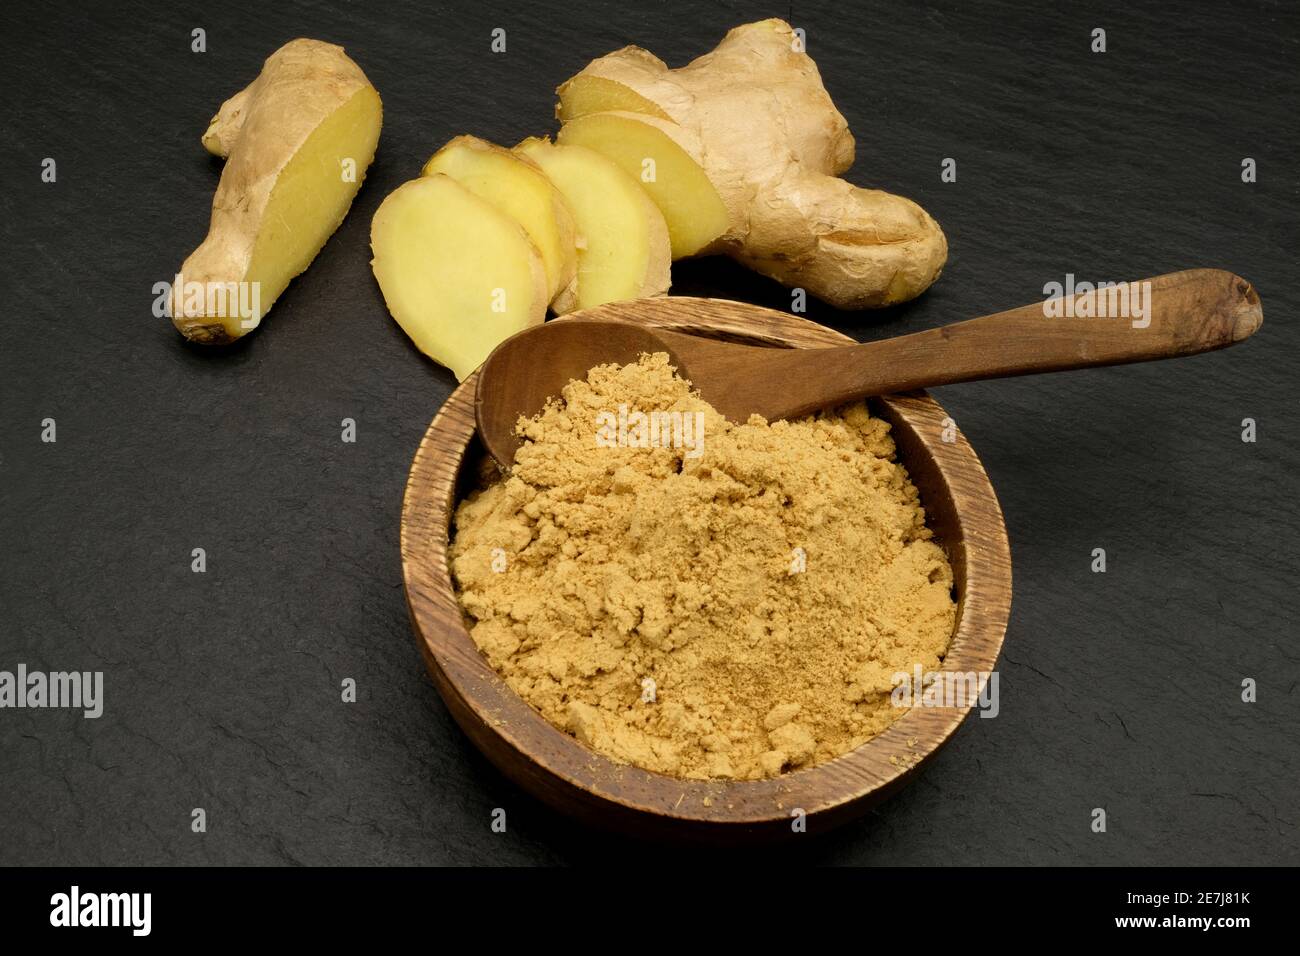 Sliced and Powdered Ginger Stock Photo